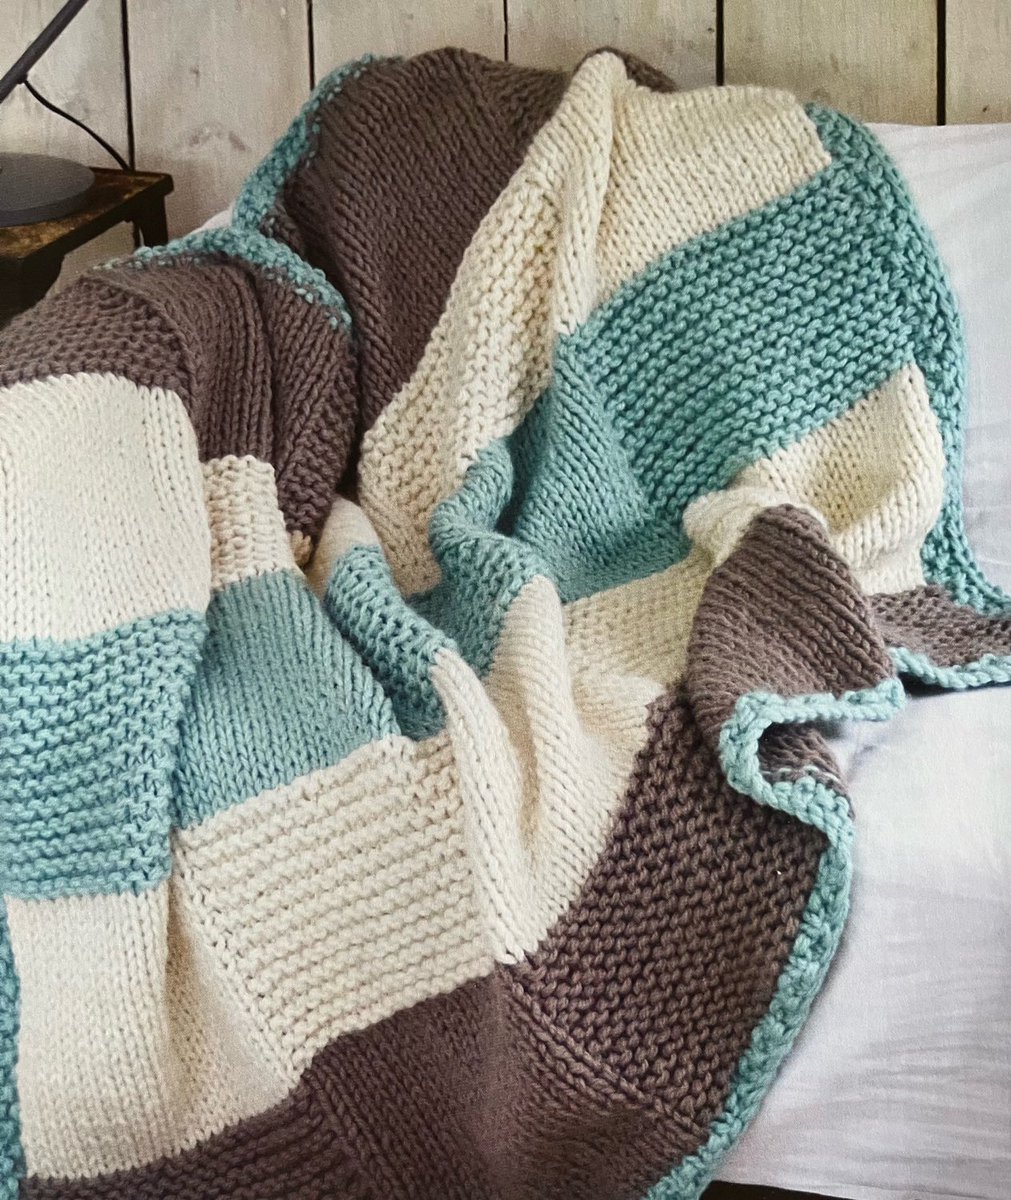 Excited to share this item from my shop: Knitted Chunky Check Blanket Knitting PDF Pattern Instant Download #knitting #knit #sewing #knittingpattern #chunkyblanket #yarnblanket #knittedblanket #throw #blankets etsy.me/3VHLqNP